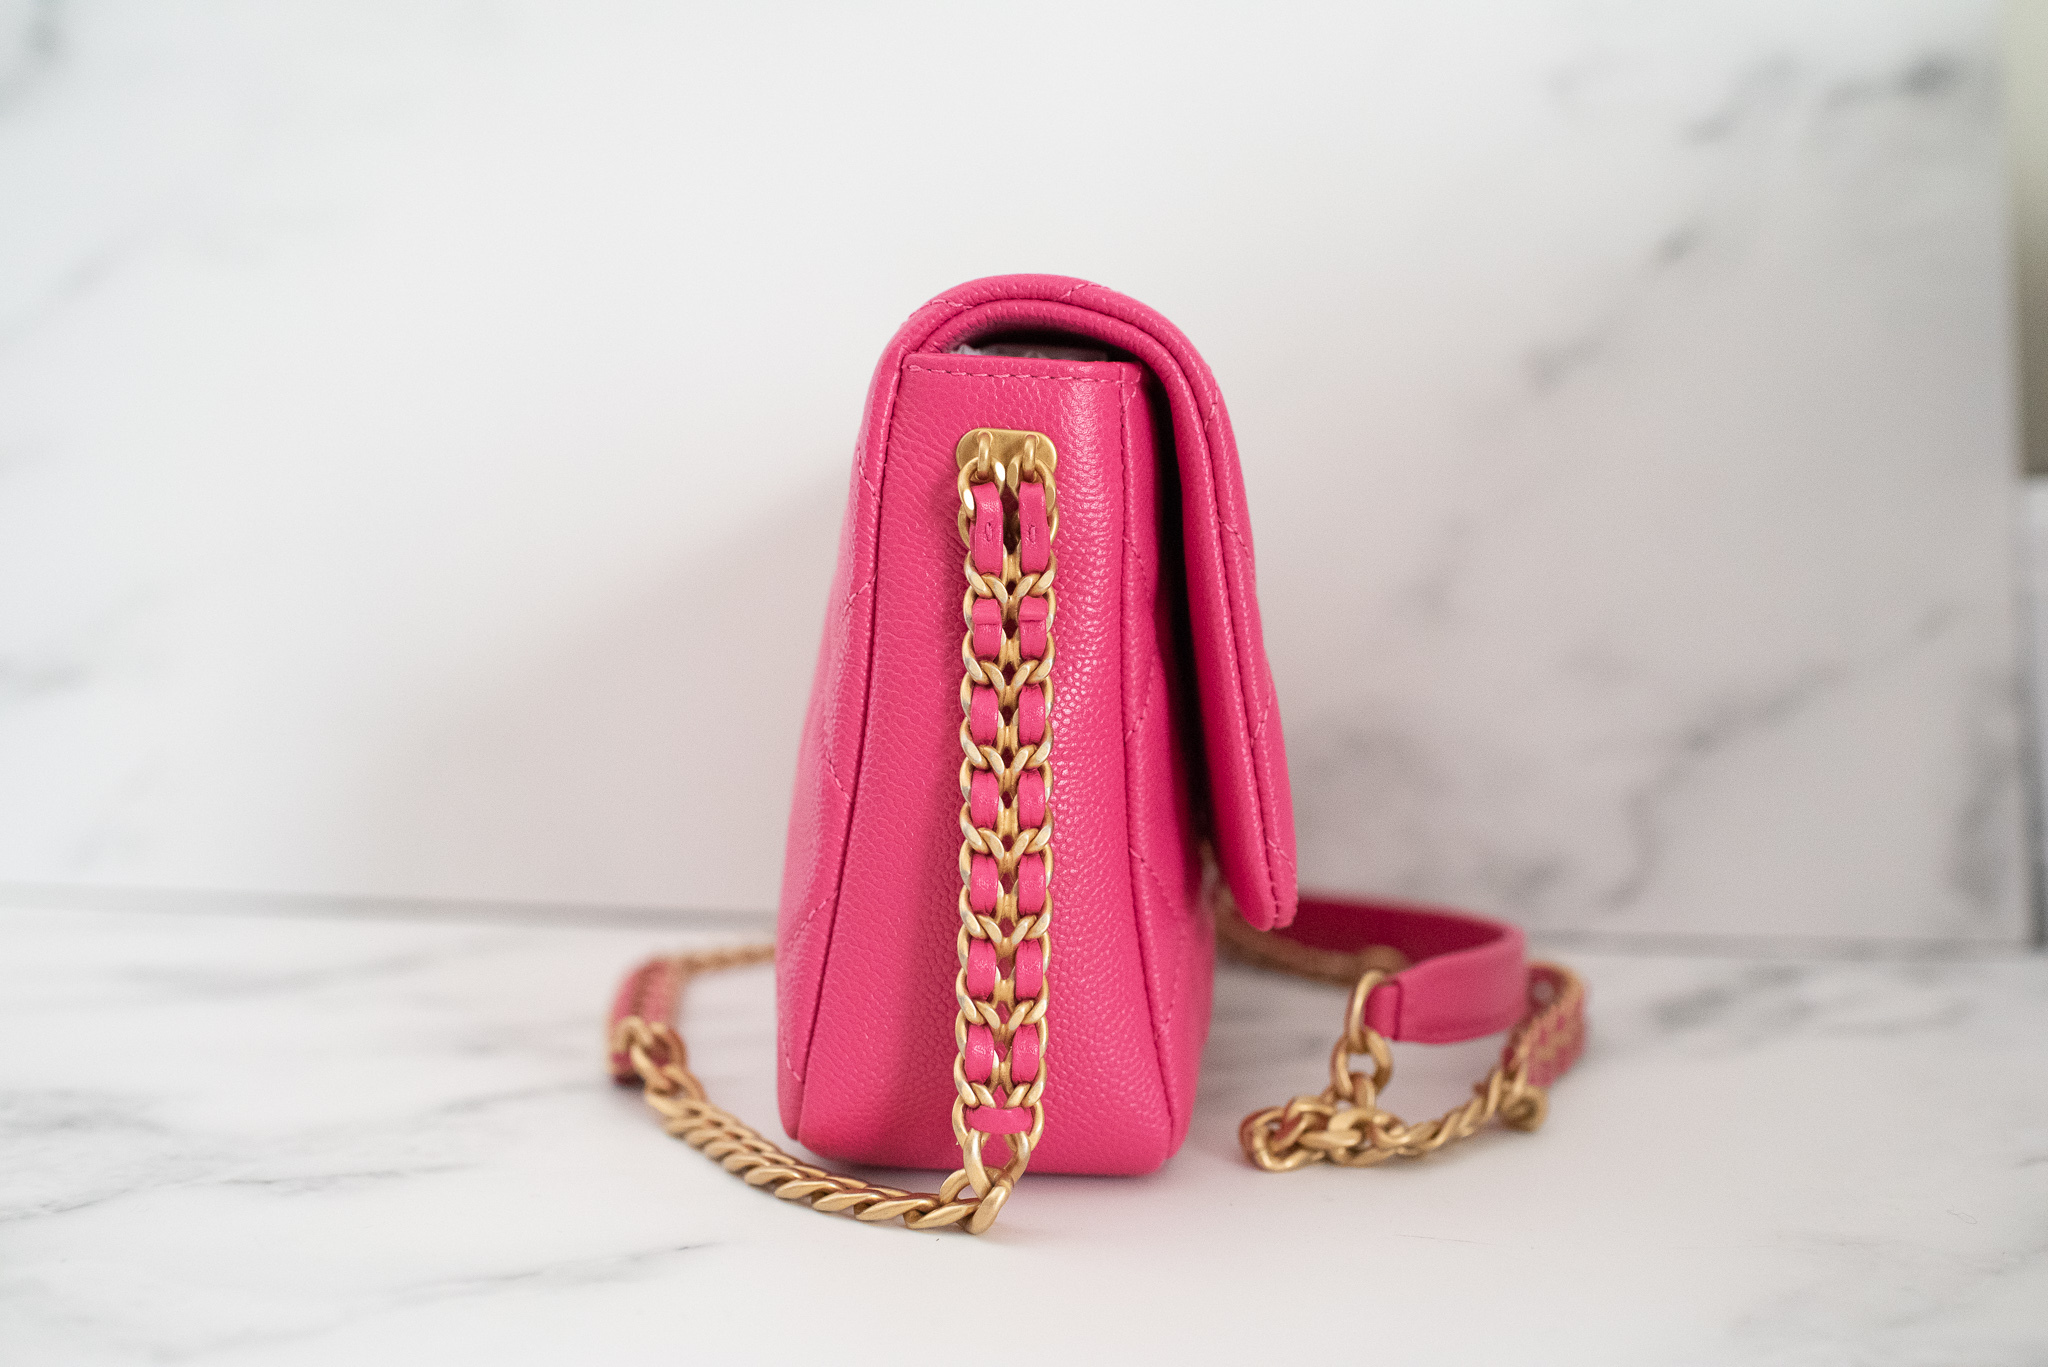 Chanel Melody Flap Small Hot Pink Caviar Leather, Brushed Gold Hardware, New  in Box GA001 MA001 - Julia Rose Boston